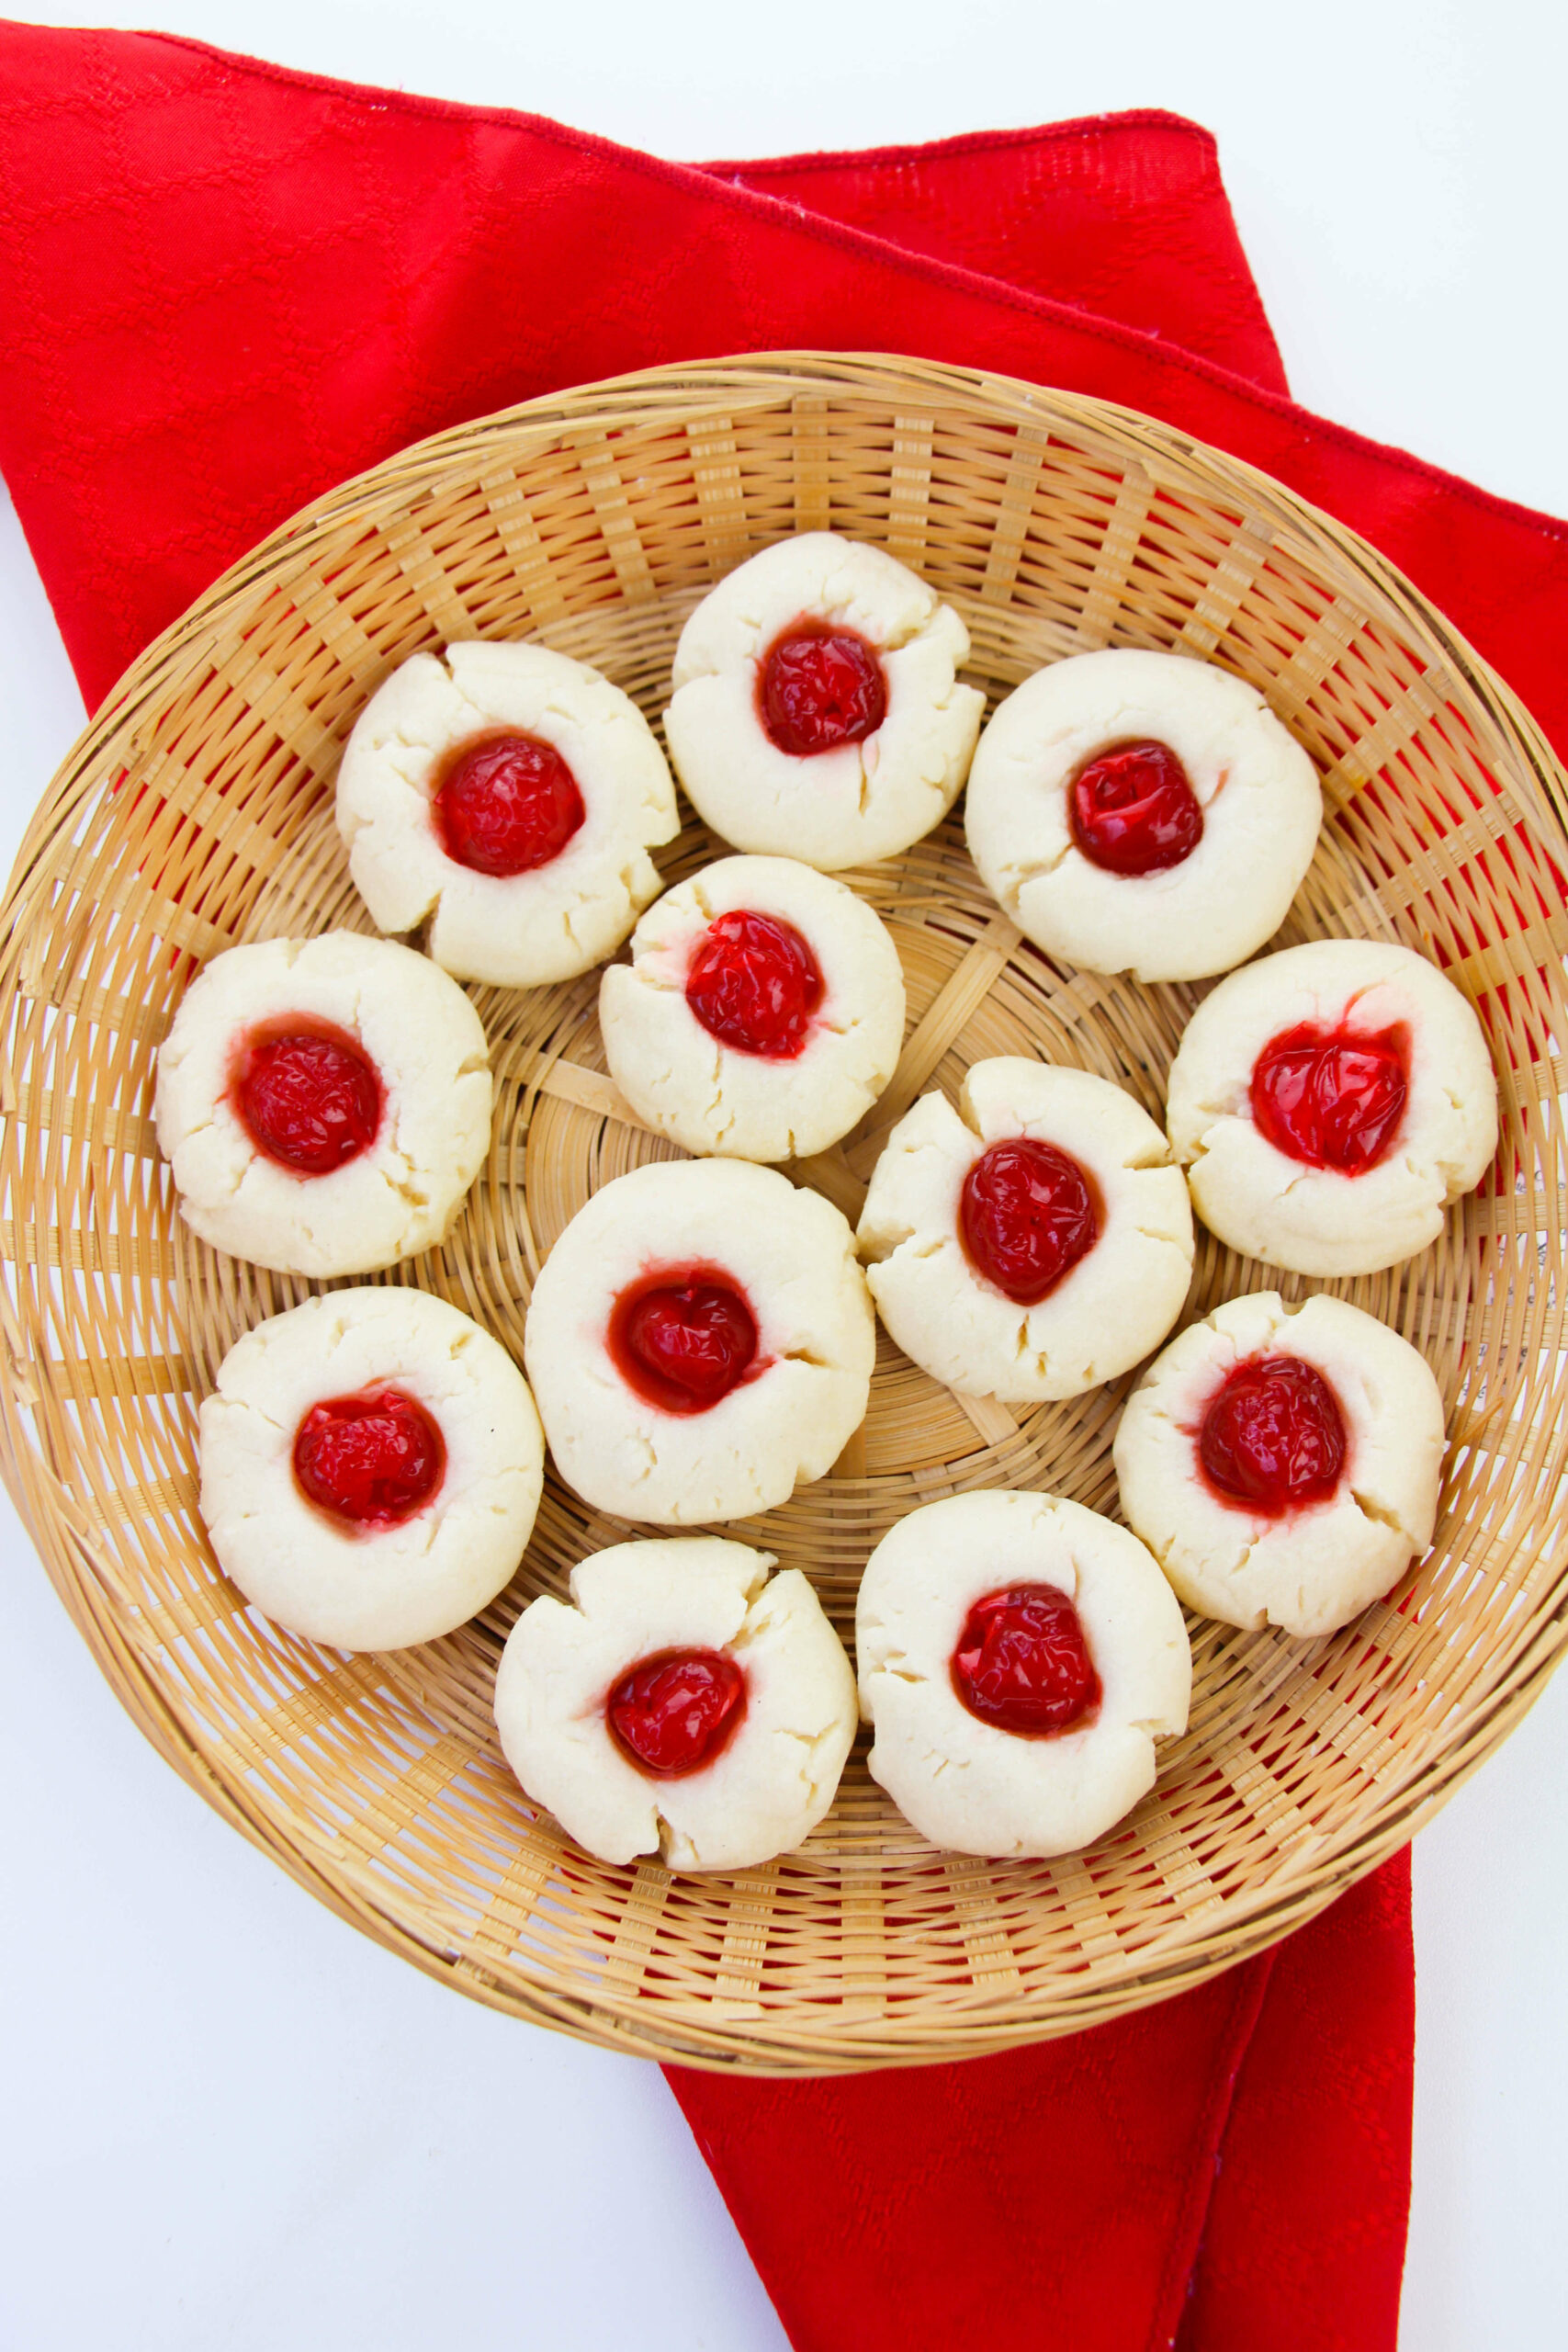 A tray of the cherry cookies with a red napkin.